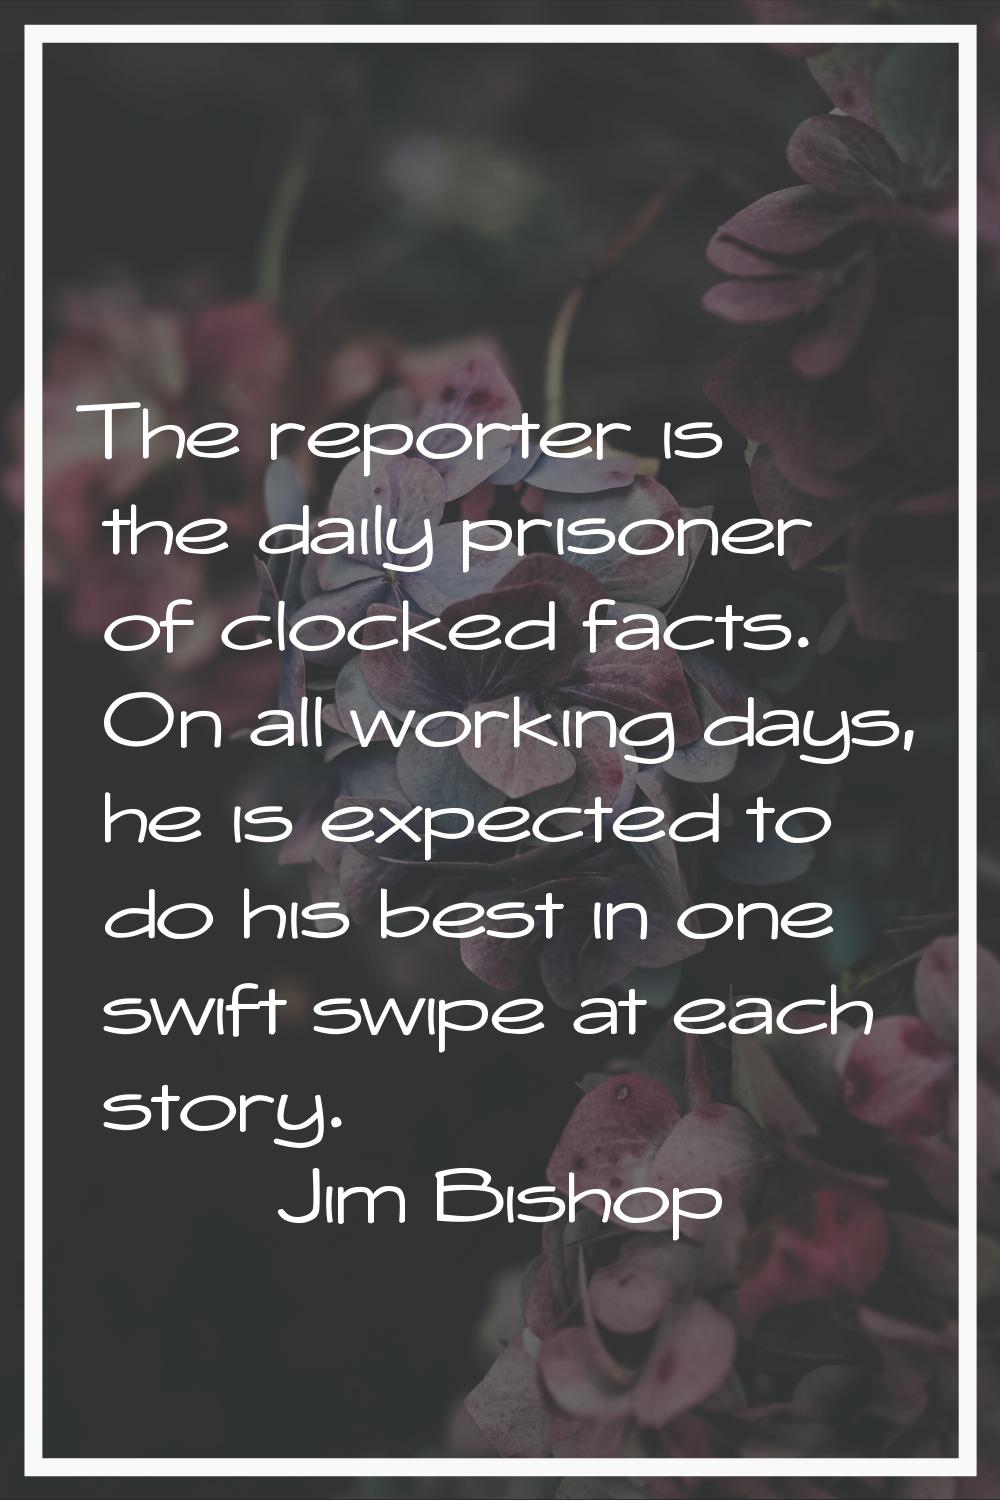 The reporter is the daily prisoner of clocked facts. On all working days, he is expected to do his 